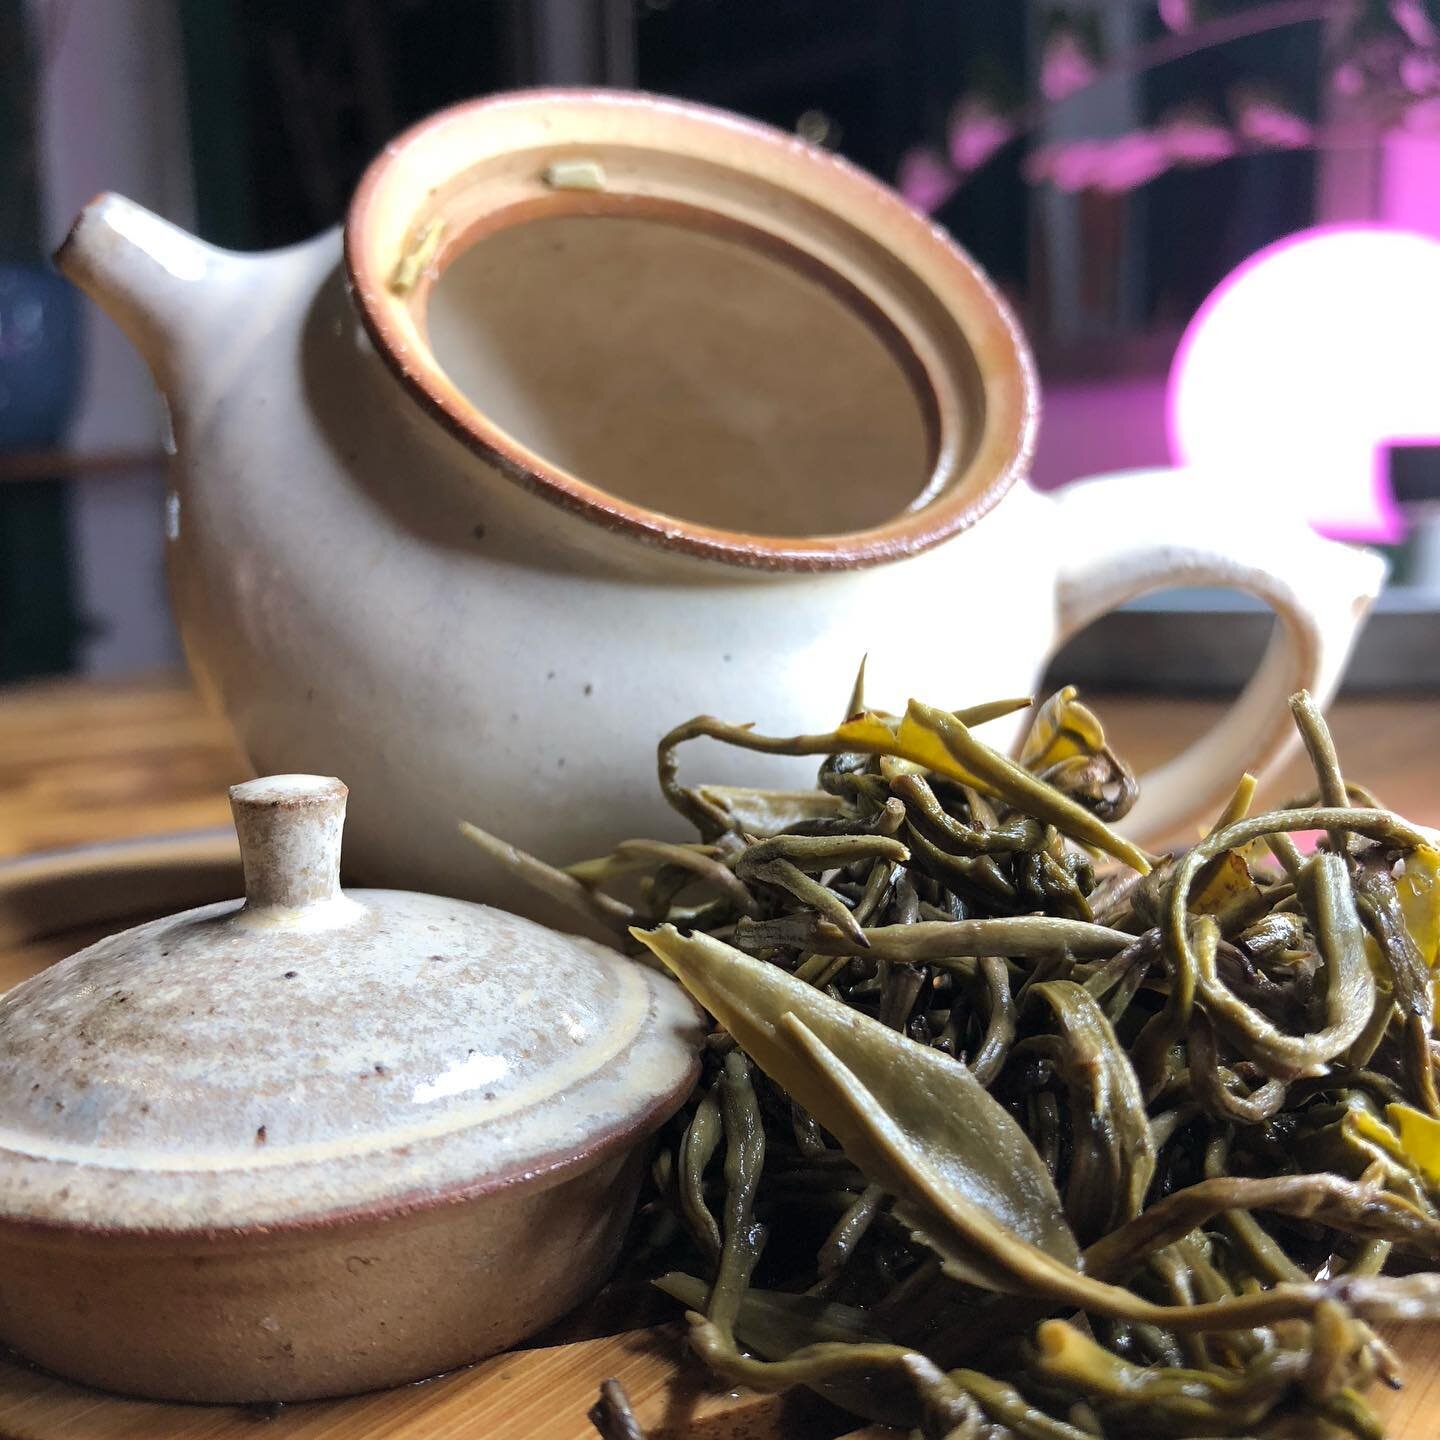 A bit of warm water undoes the work of hand-rolling these beautiful Jasmine Pearls. Our newly arrived Imperial Grade Jasmine Pearls from Yunnan.